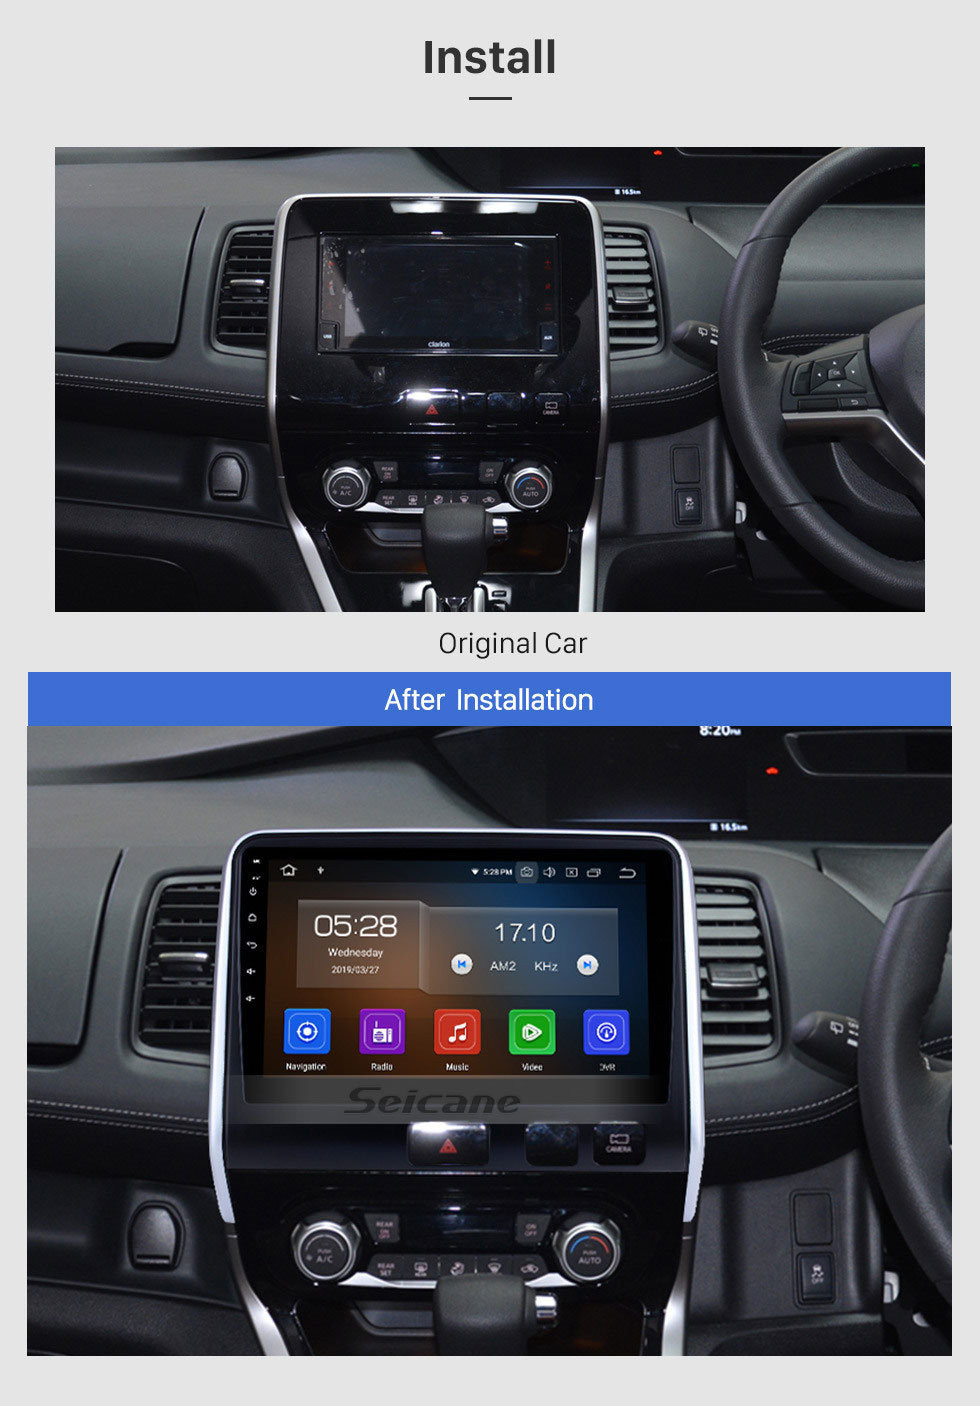 Seicane Aftermarket Android 11.0 HD Touchscreen 10.1 inch Radio for 2016 2017 2018 Nissan Serena Bluetooth GPS Navigation Head unit support /4G wifi DVD Player Carplay 1080P